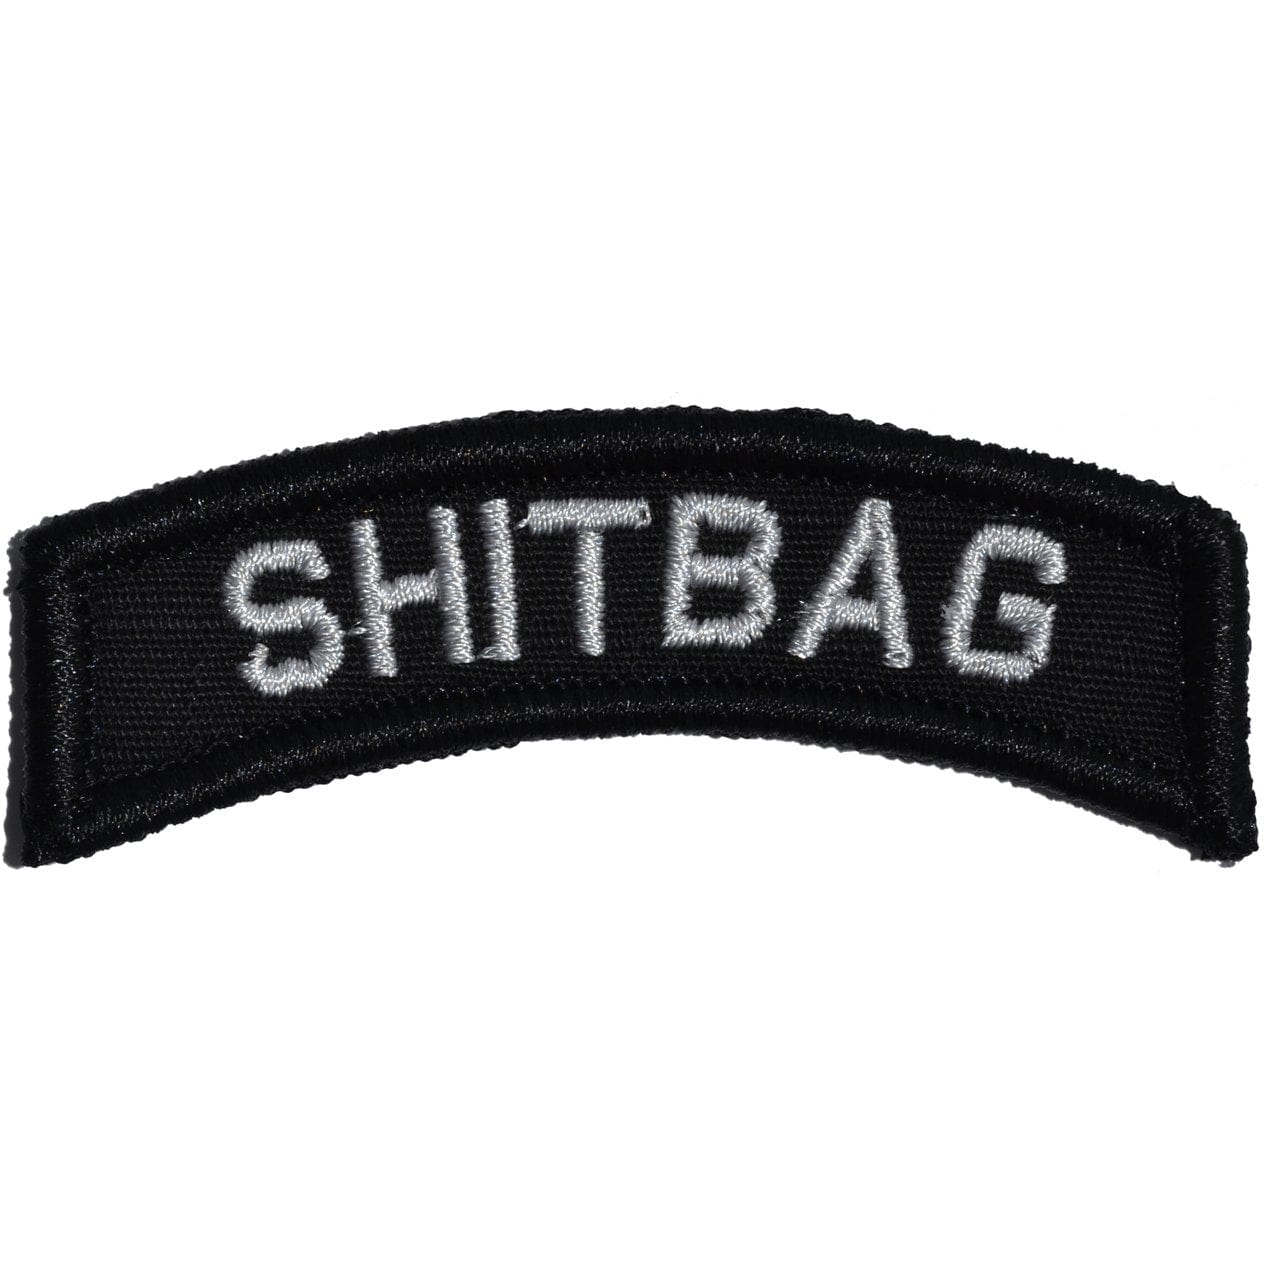 Tactical Gear Junkie Patches Black Shitbag Tab Patch